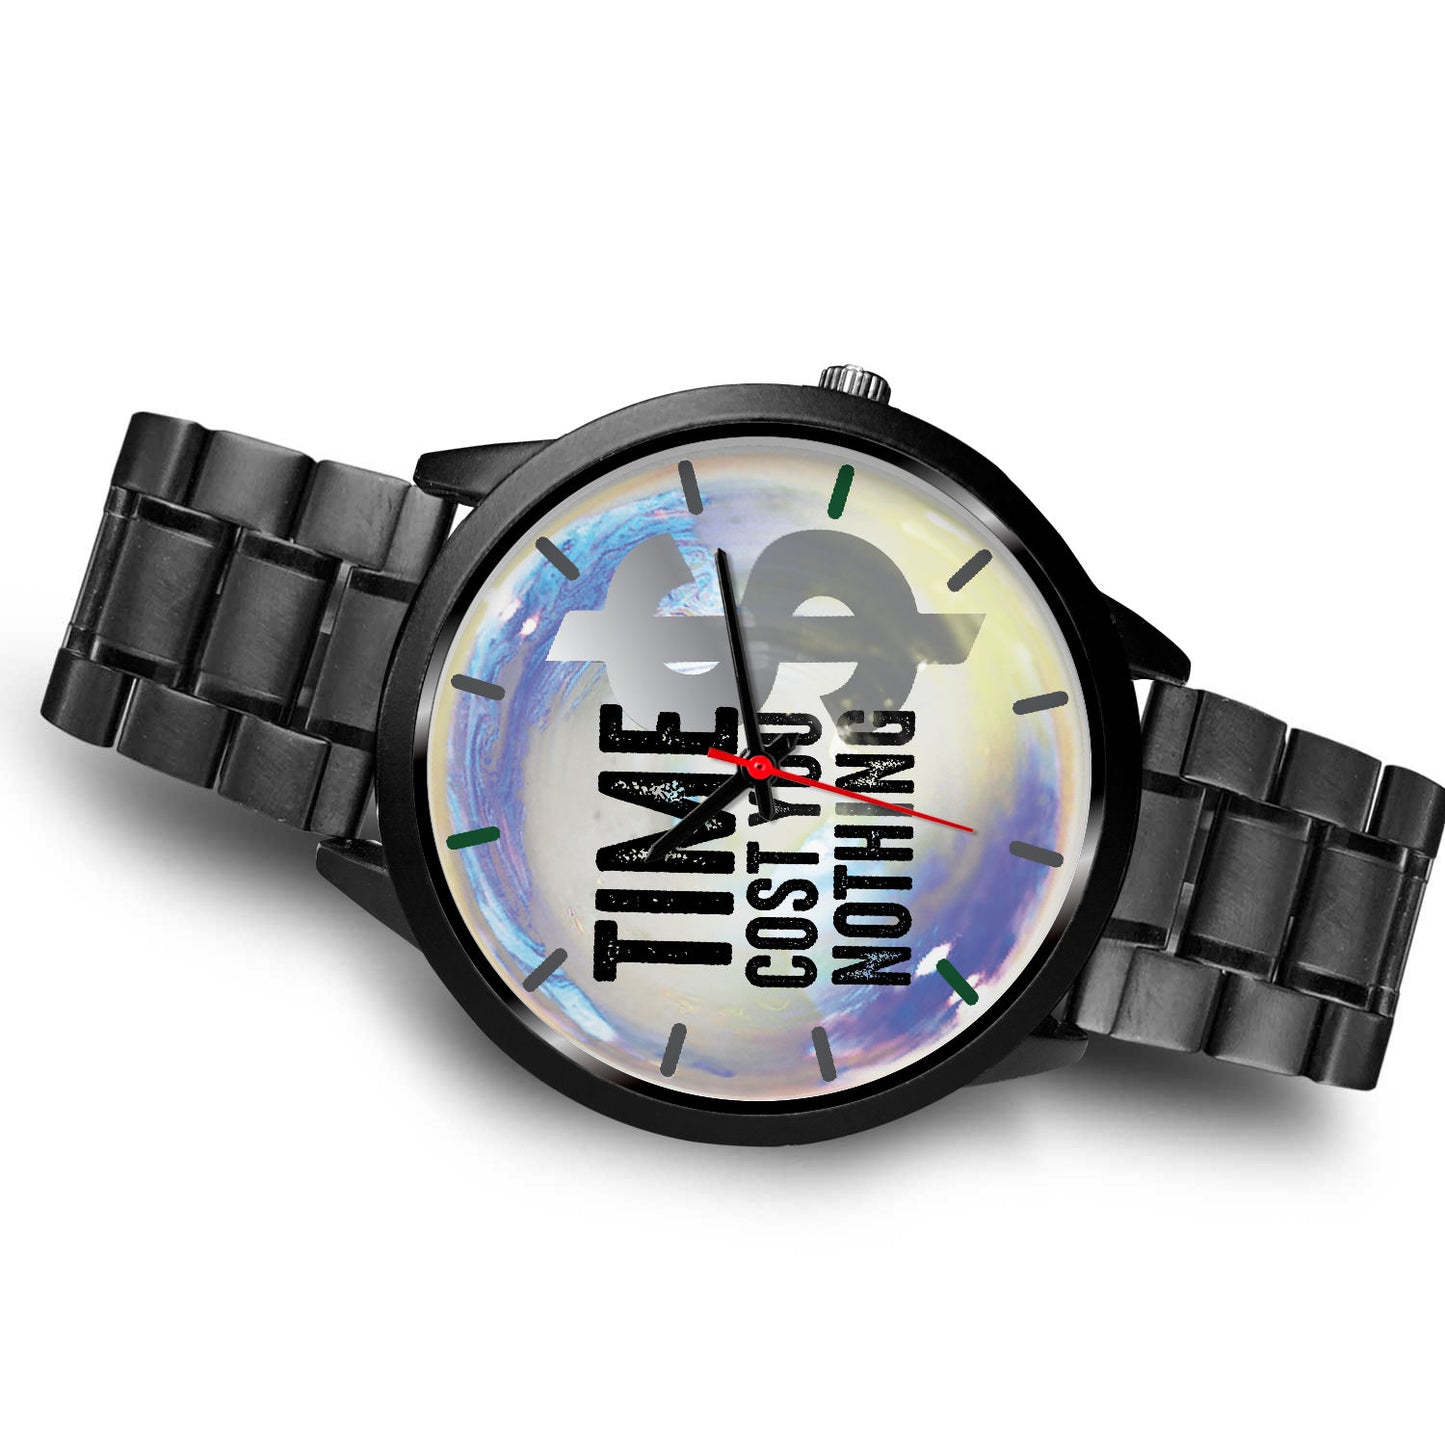 Time Cost You Nothing Black Watch Options-Black Watch-Digital Rawness